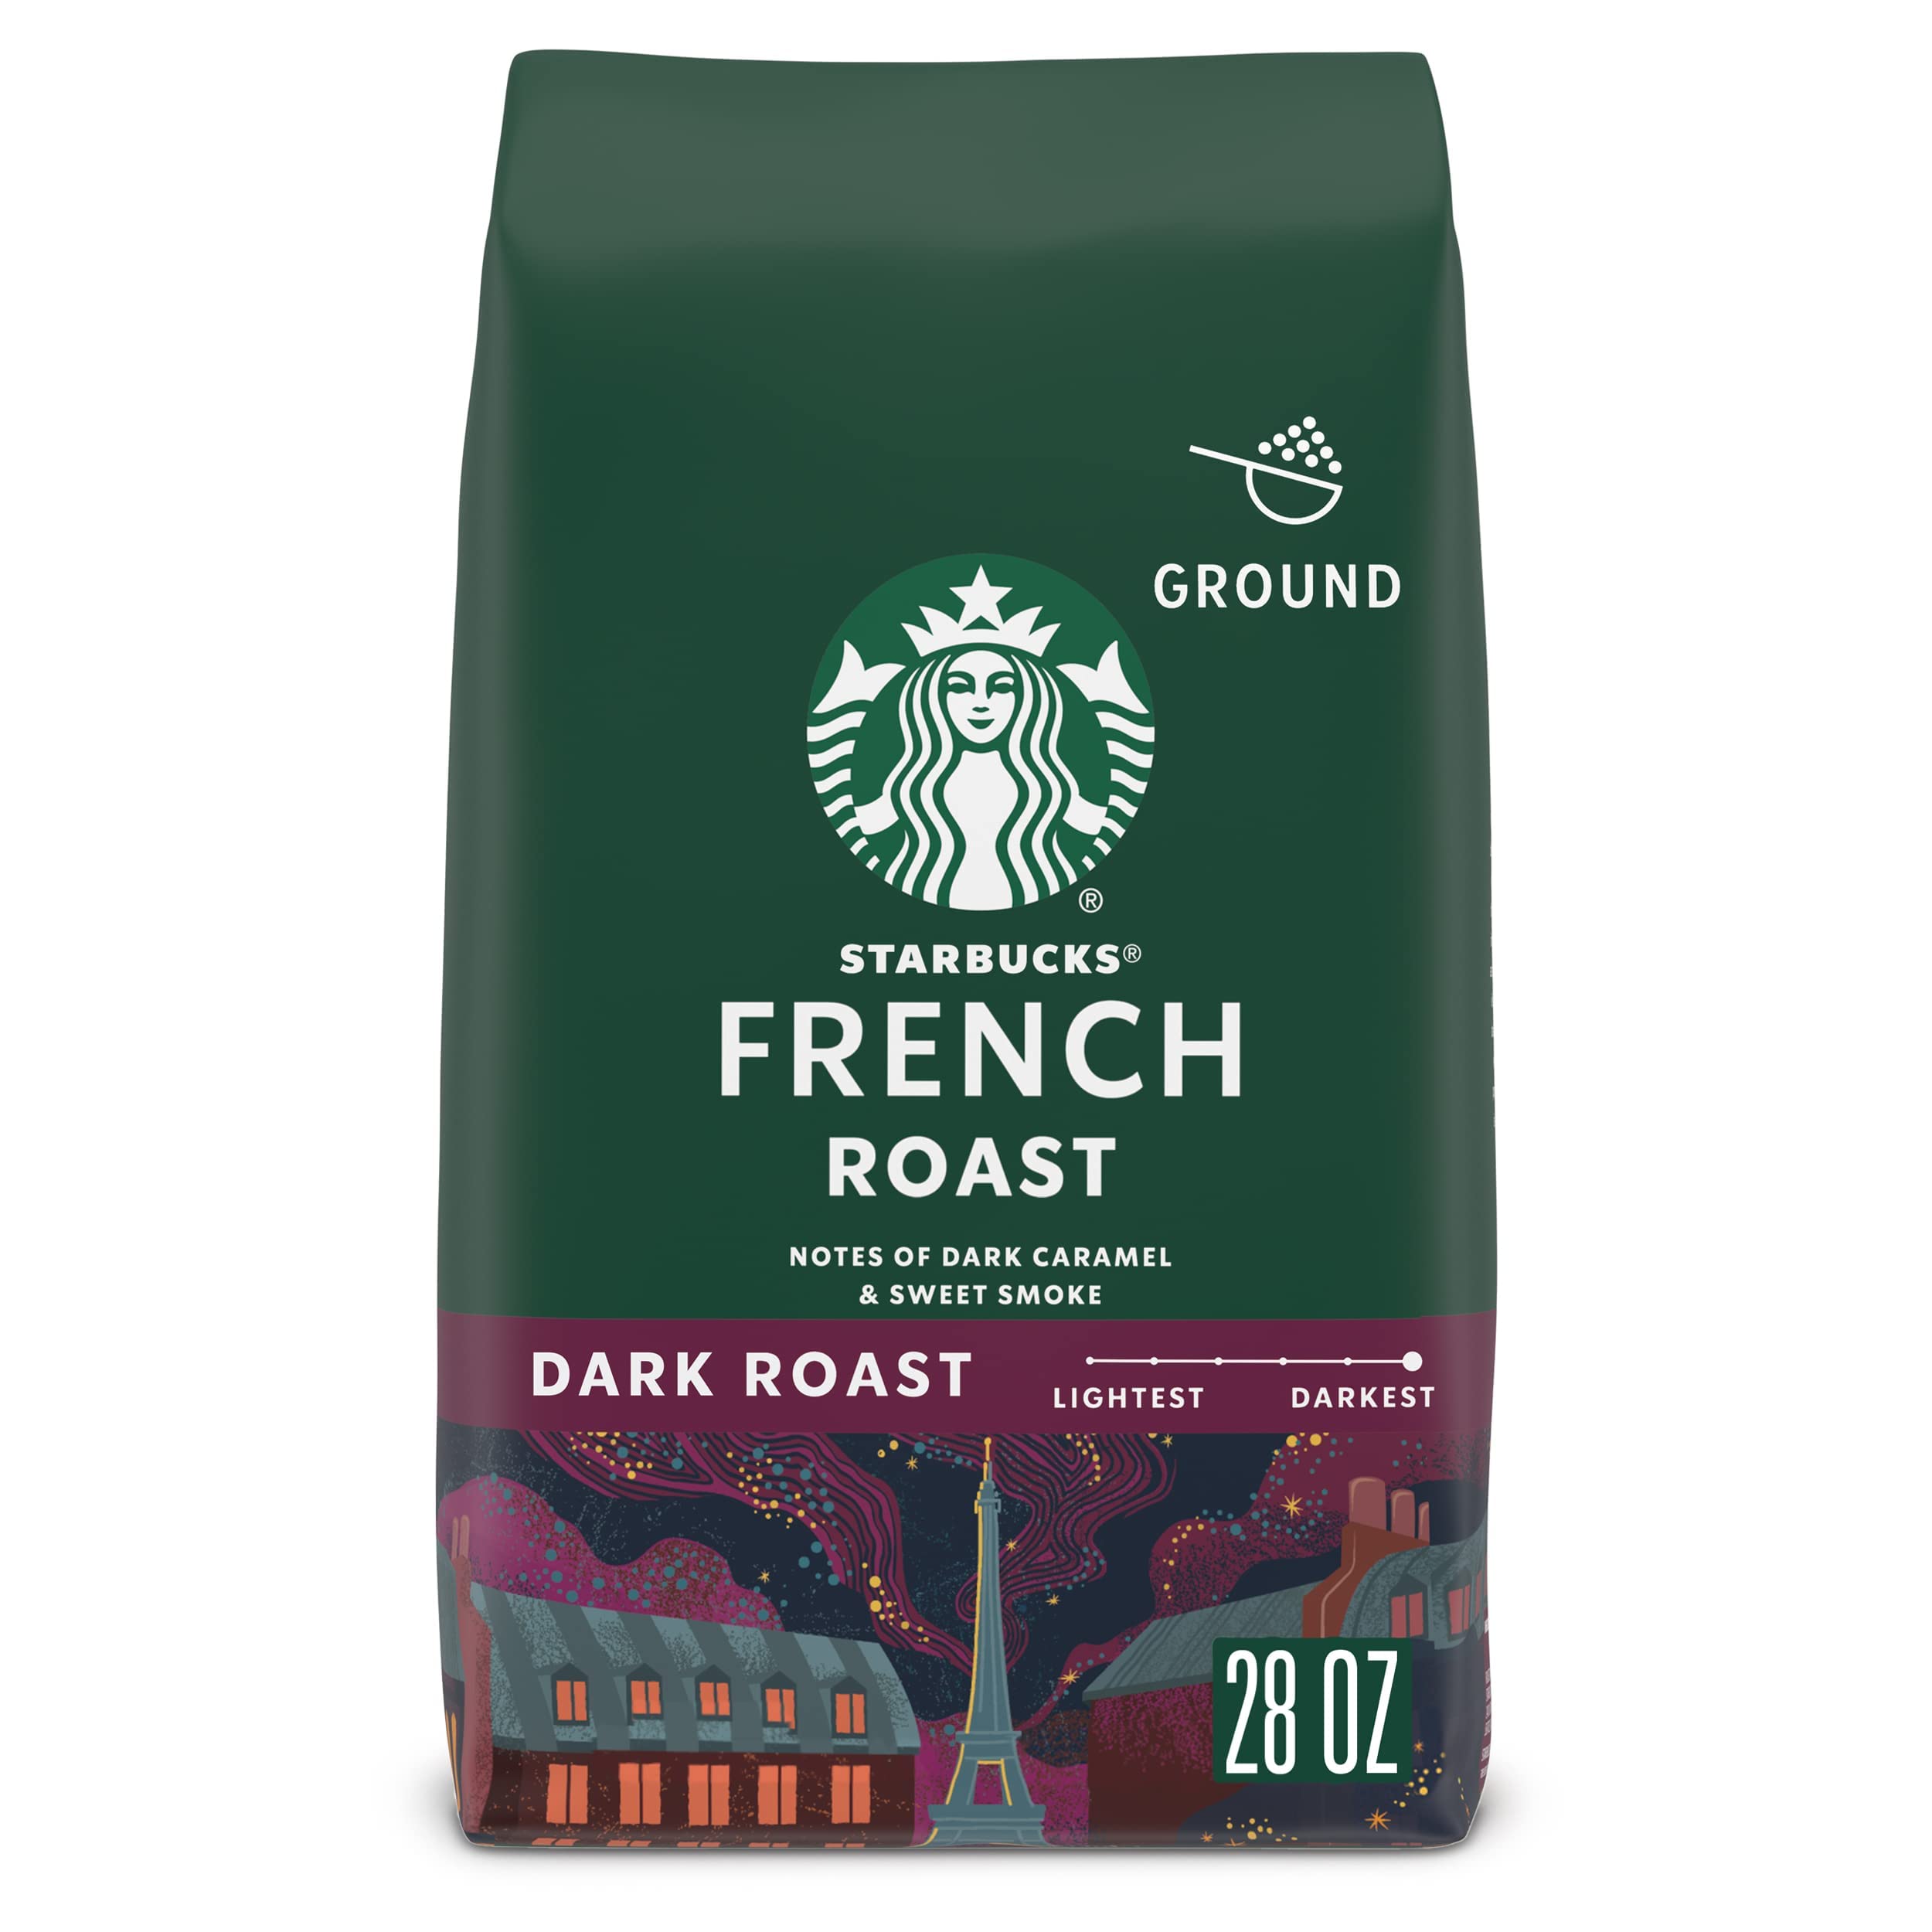 Starbucks Ground Coffee French Roast Dark Roast 28oz $11.38 after 15% Subscribe and Save and Coupon